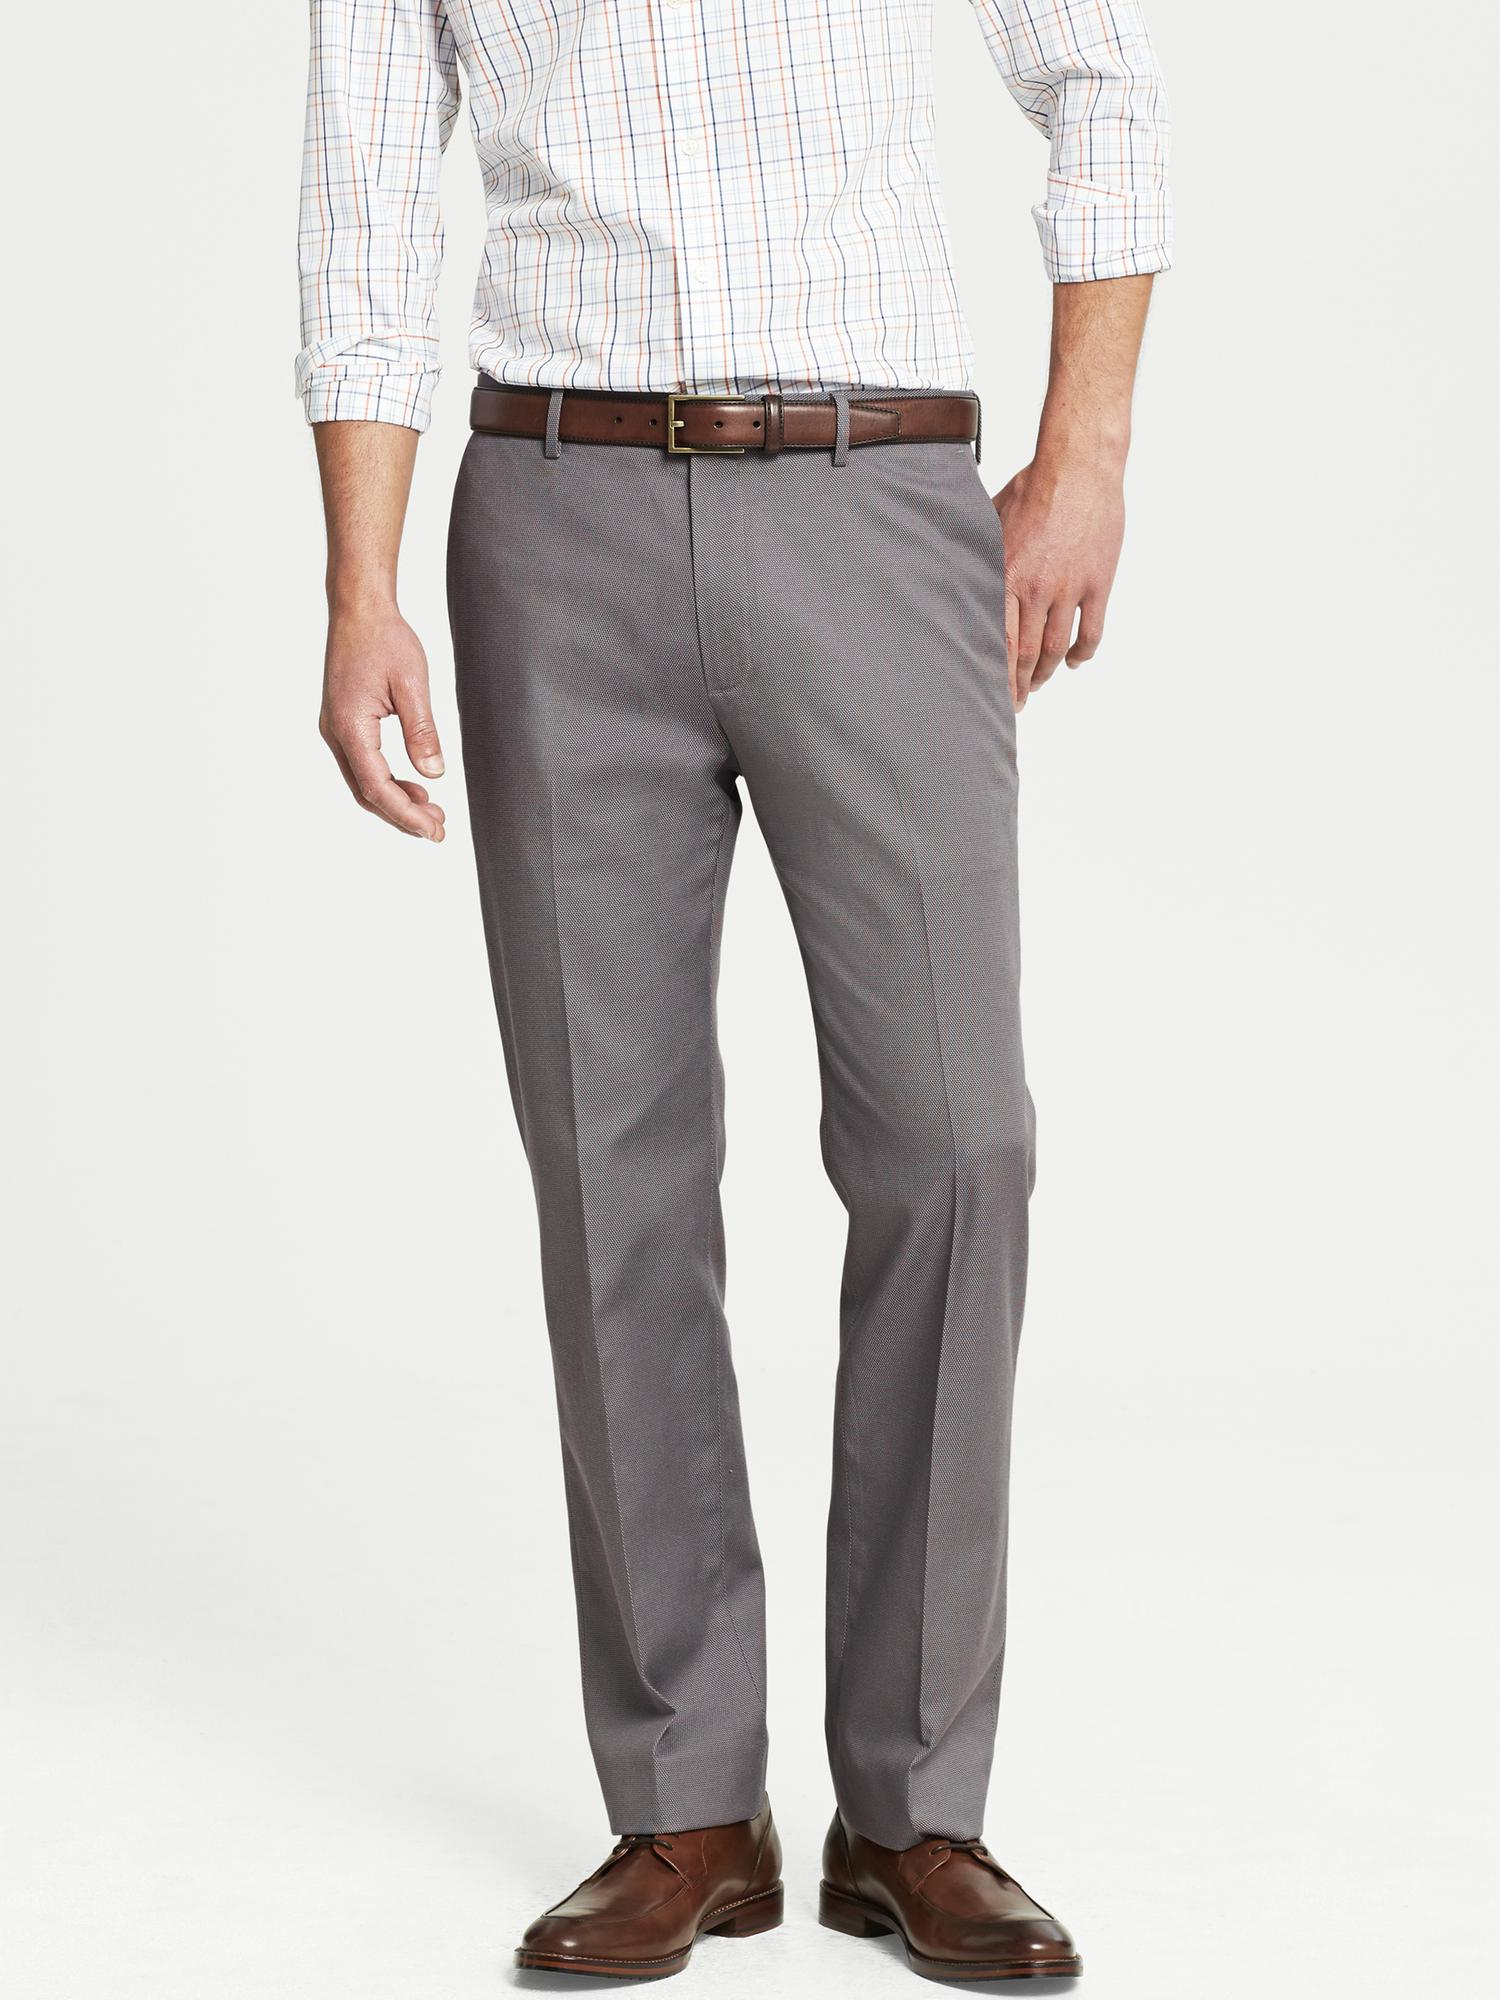 Lyst - Banana Republic Tailored Slim-Fit Non-Iron Cotton Pant in Gray ...